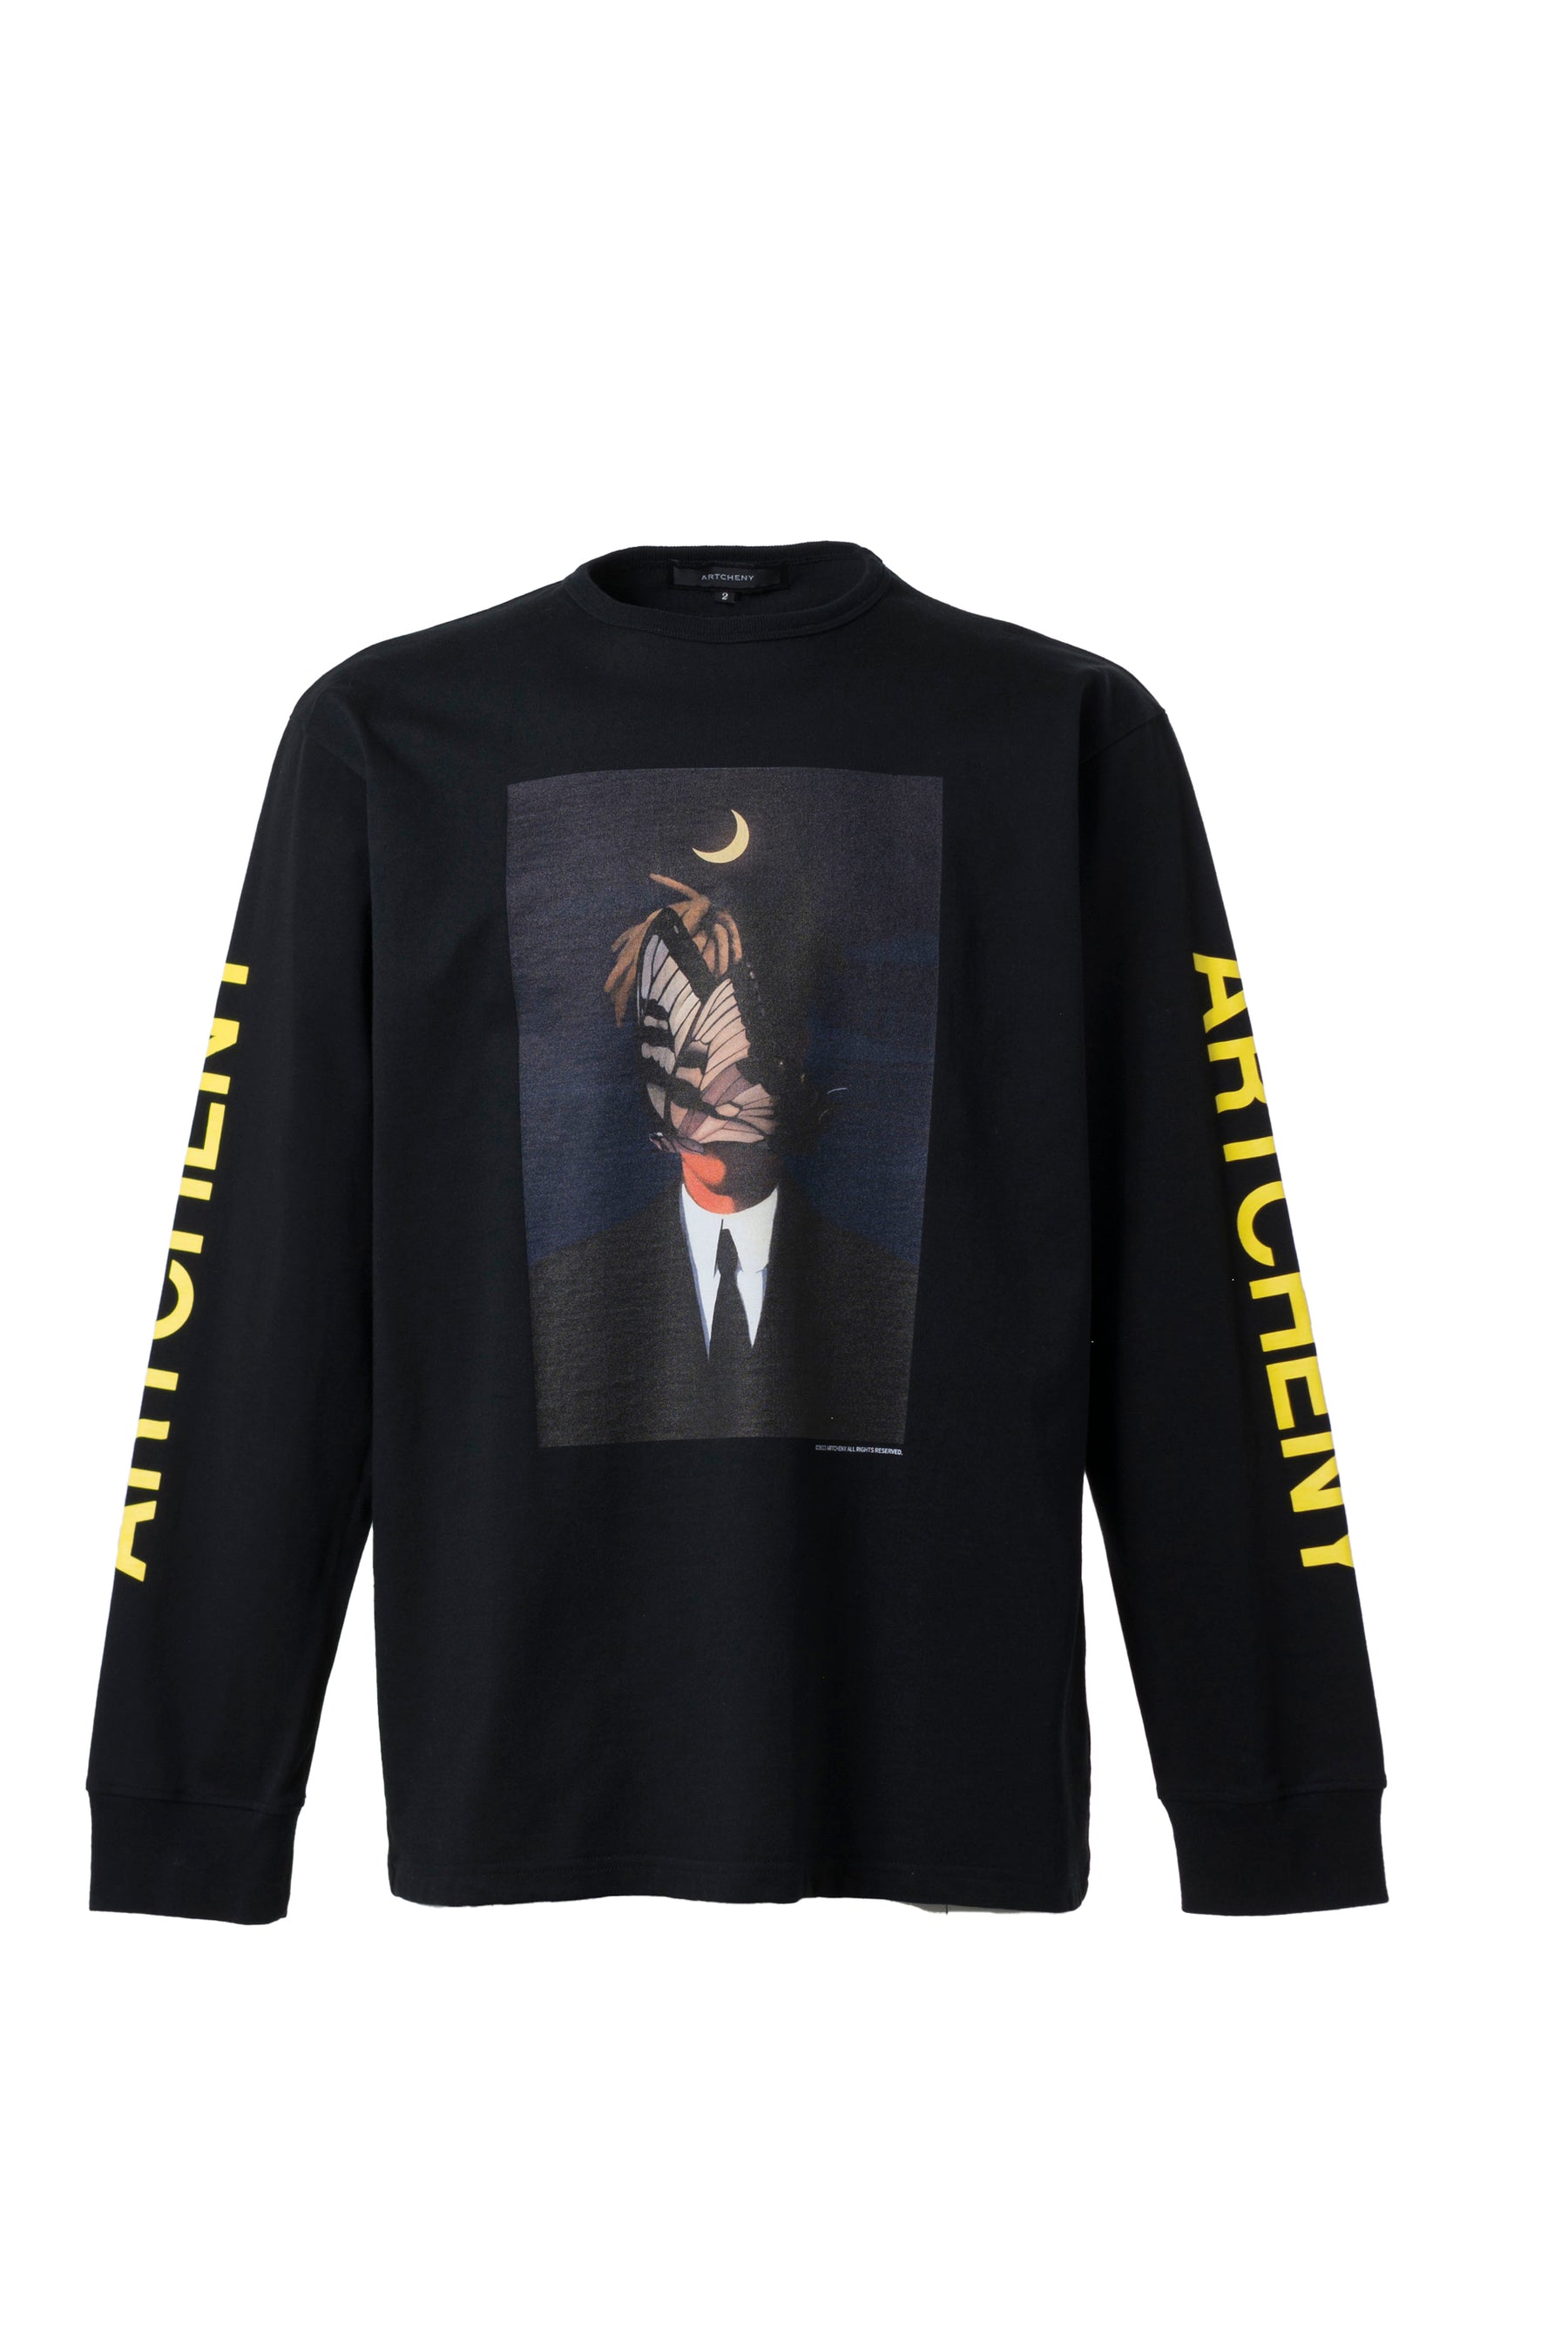 ARTCHENY SS23 LONG SLEEVE T-SHIRTS NIGHTMARE / BLK -NUBIAN